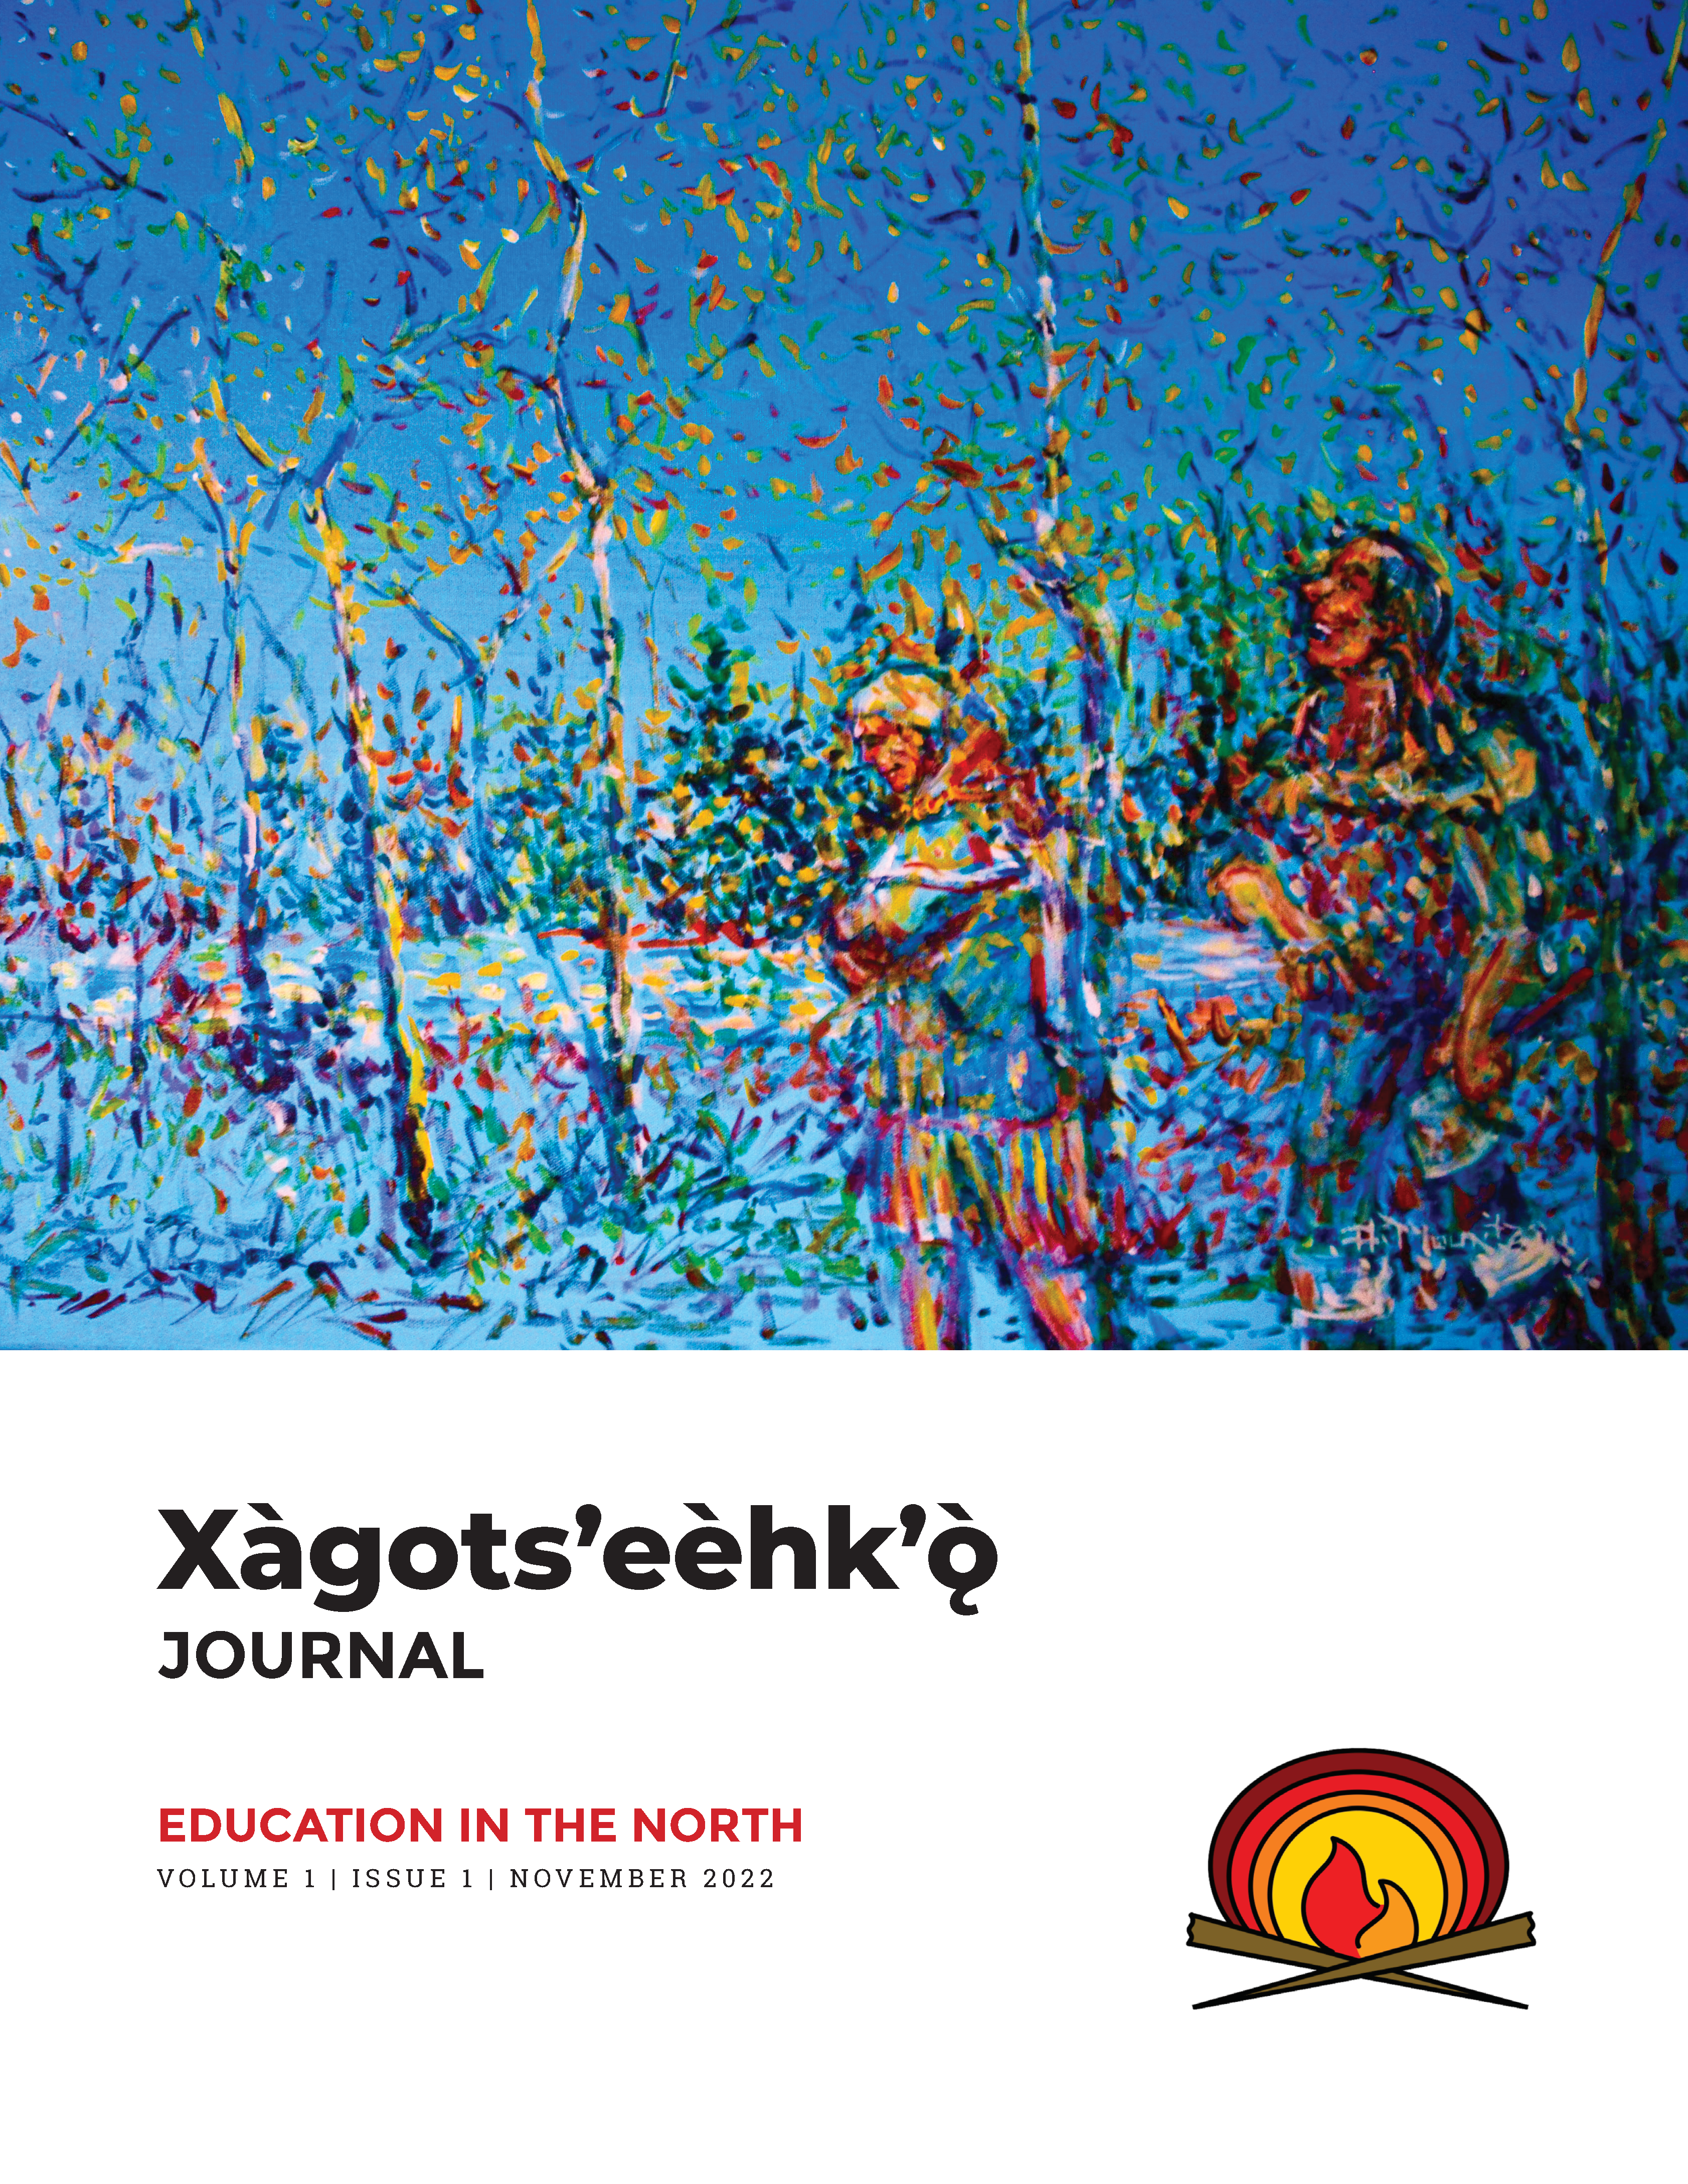 A painting by Dene artist Antoine Mountain This painting depicts a grandmother and her granddaughter on their way back from checking rabbit snares in springtime. The snow and sky are shades of blue, and the women and the trees are colourful rainbows of brush strokes. Below the painting is text that says Ha goat seh ko journal, Education in the North, Volume one, issue one, November 2022. The journal logo is in the bottom right corner, which features an orange and red fire with four concentric circles around it in yellow, orange, and red.